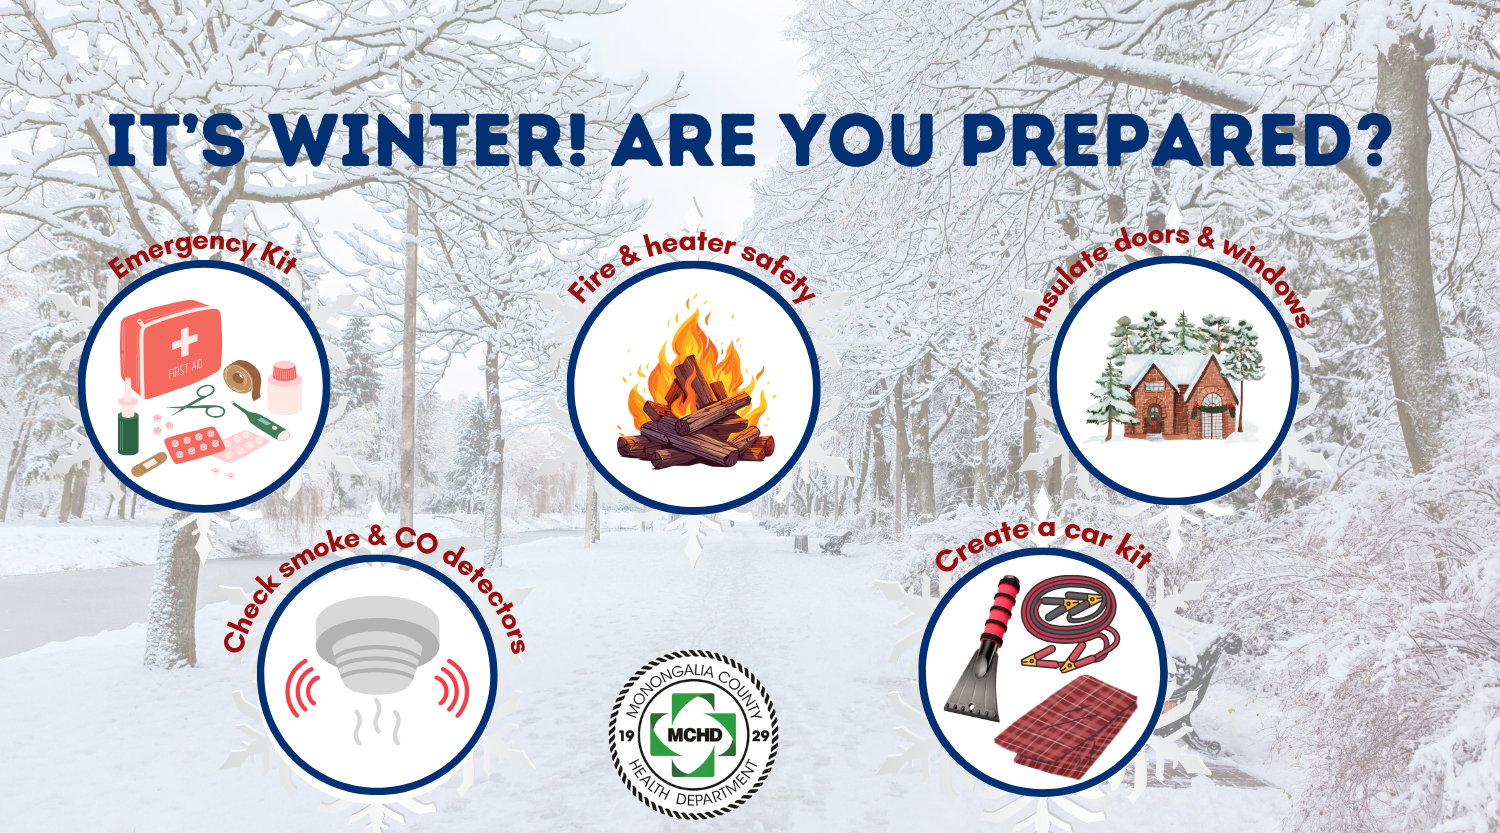 ‘Be prepared’ a good motto for winter